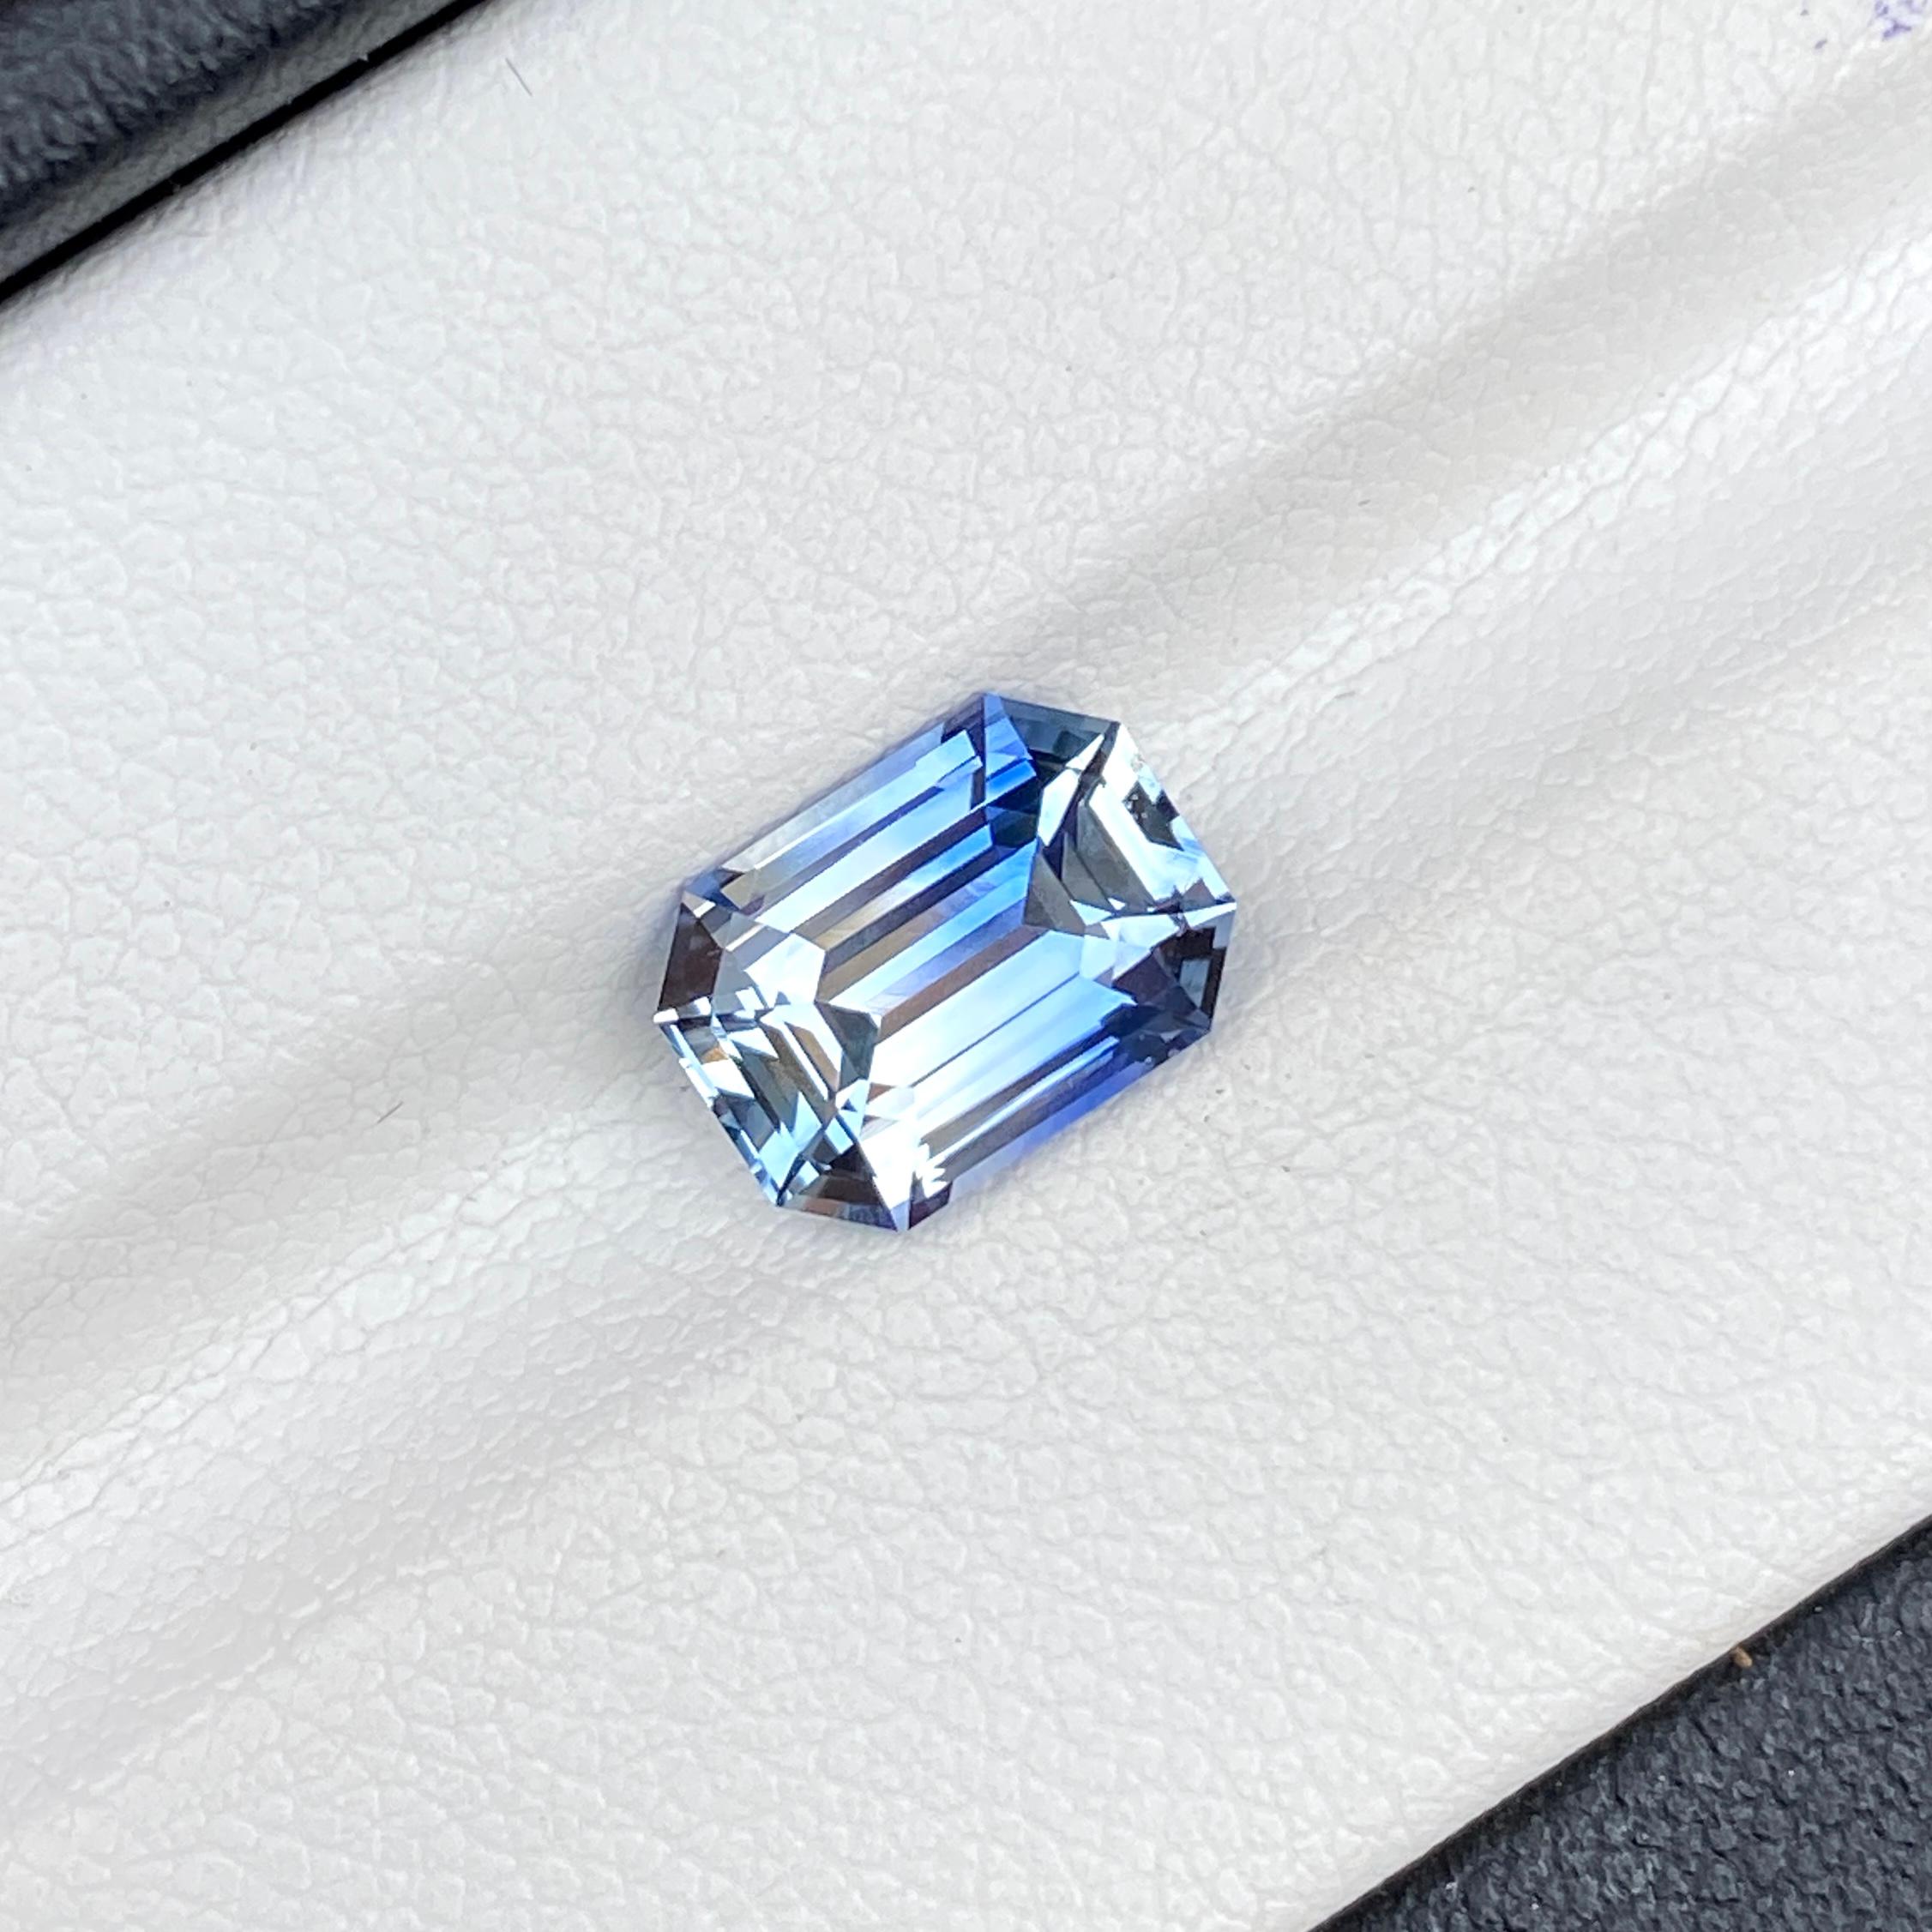 Indulge in the luxury of this 2.49 ct unheated sapphire, sourced from Sri Lanka. Its stunning emerald cut and unique sky blue x light yellow bi-colour will add a unique elegance and exclusivity to a jewellery masterpiece. Natural and unaltered, this